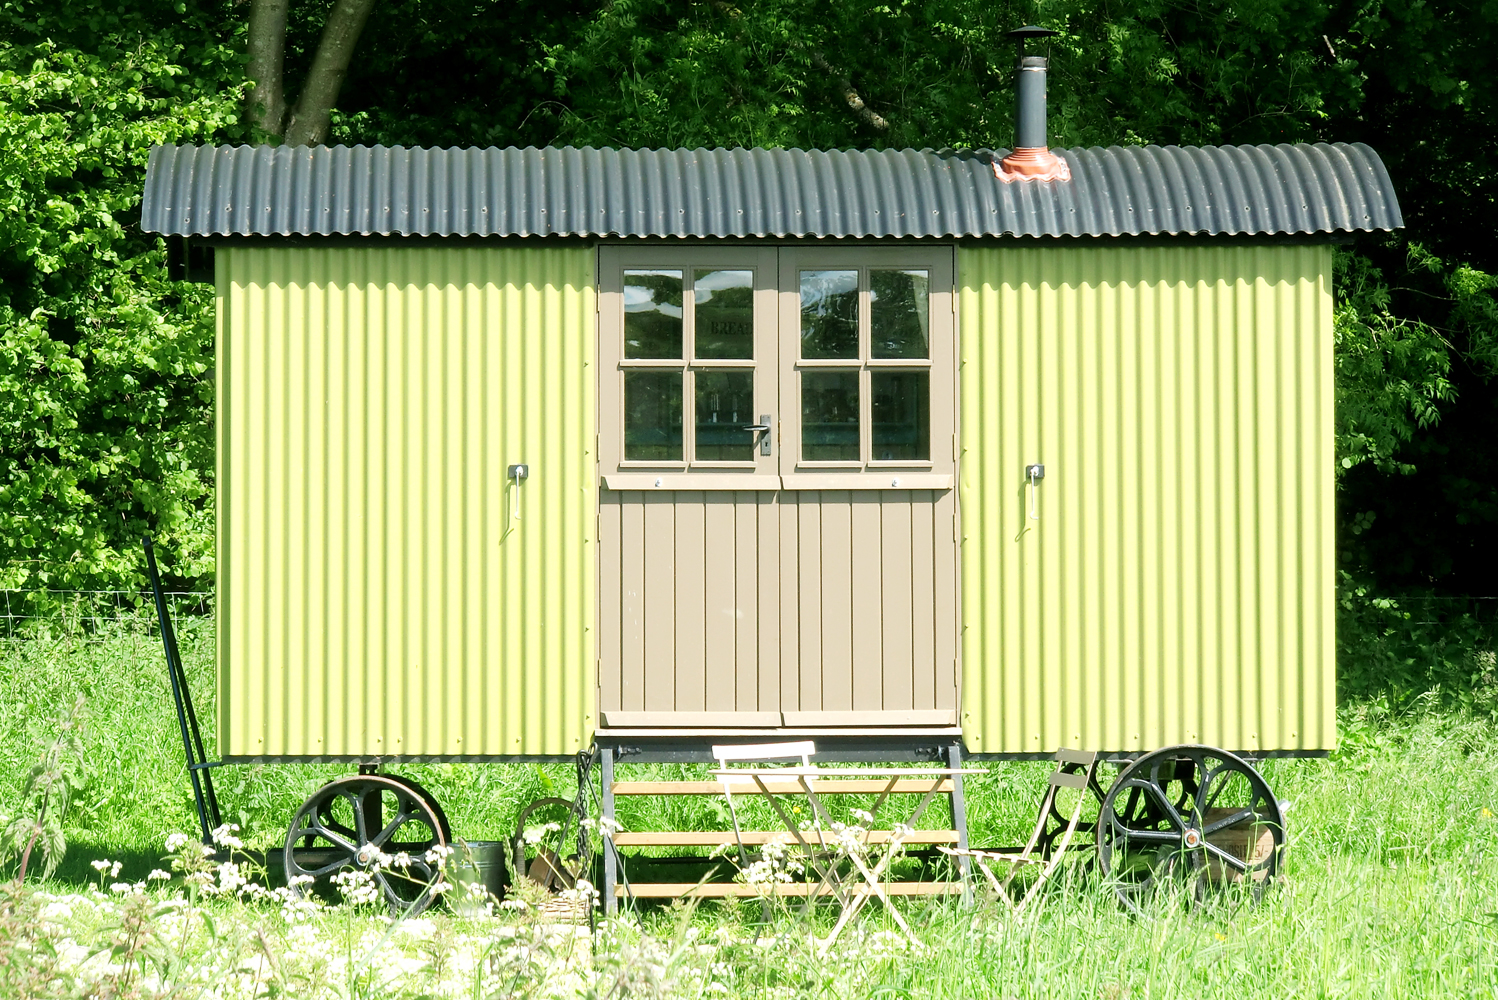 Boundary shepherd's hut is perfect for family glamping holidays and is painted a pale green and double doors make the interior feel more spacious